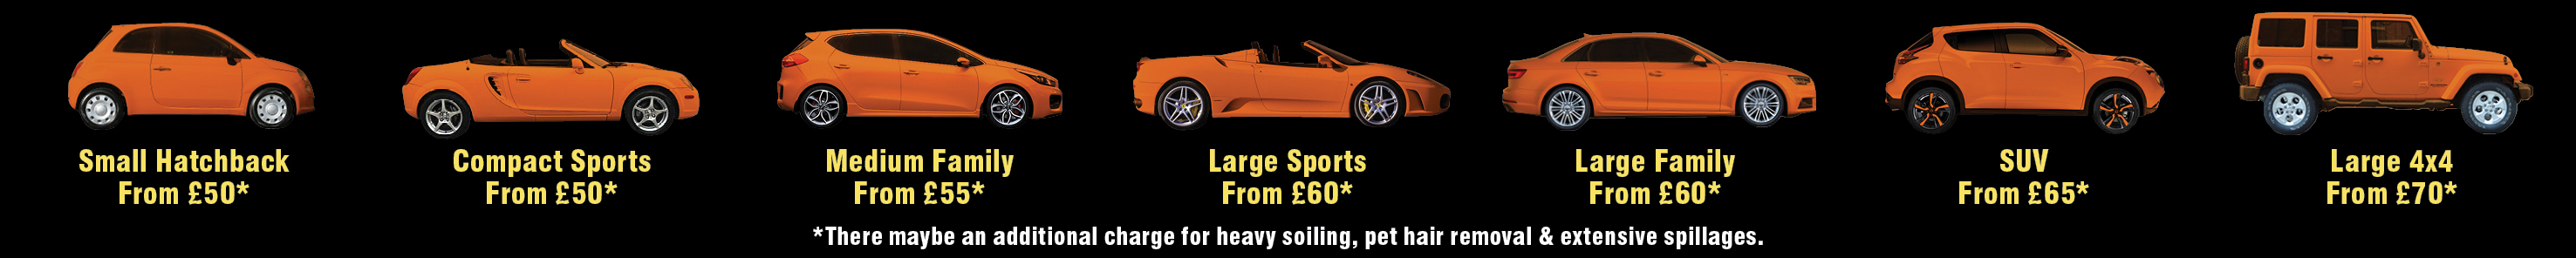 image banner showing car sizes and prices. Small hatchback from £70 Large 4x4 from £70.